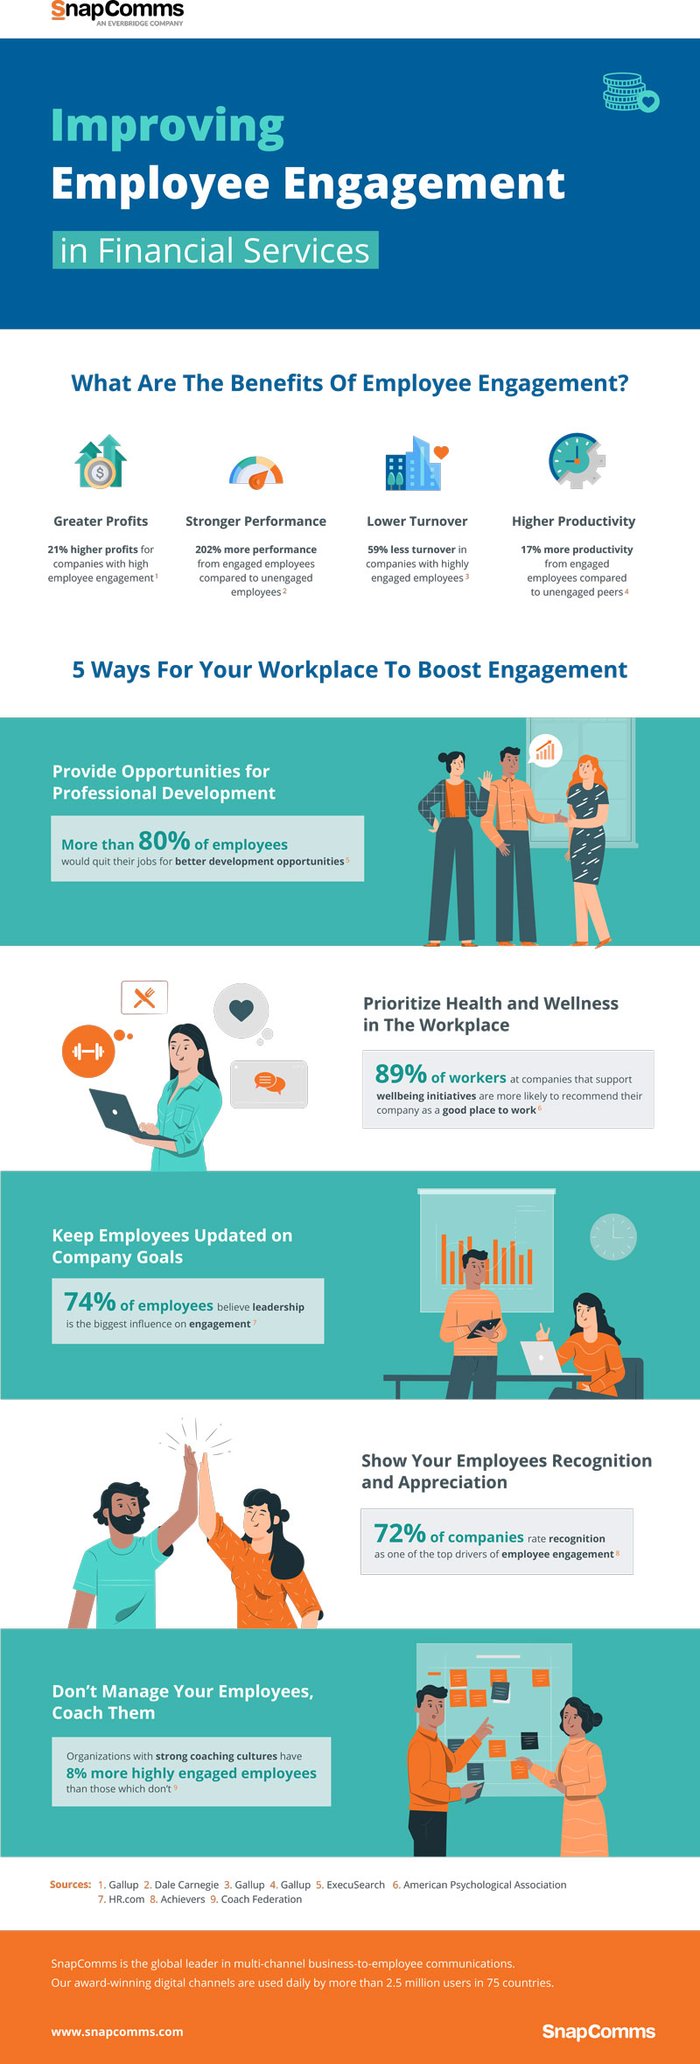 Employee Engagement Financial Services Infographic